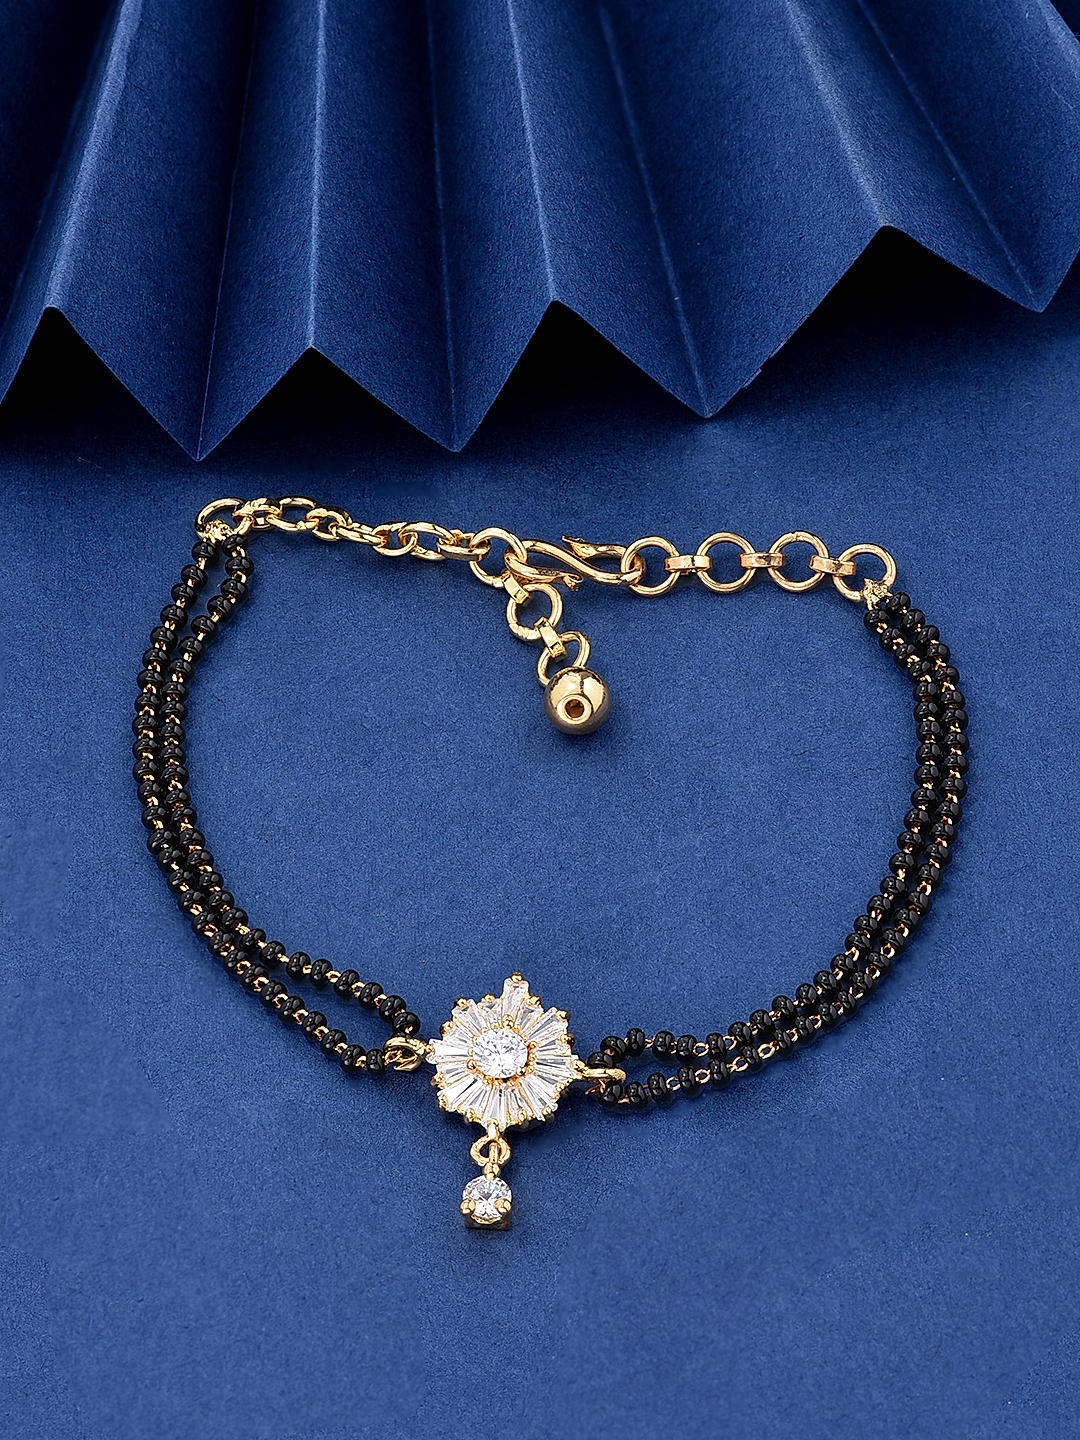 Who can wear a Mangalsutra bracelet  Quora